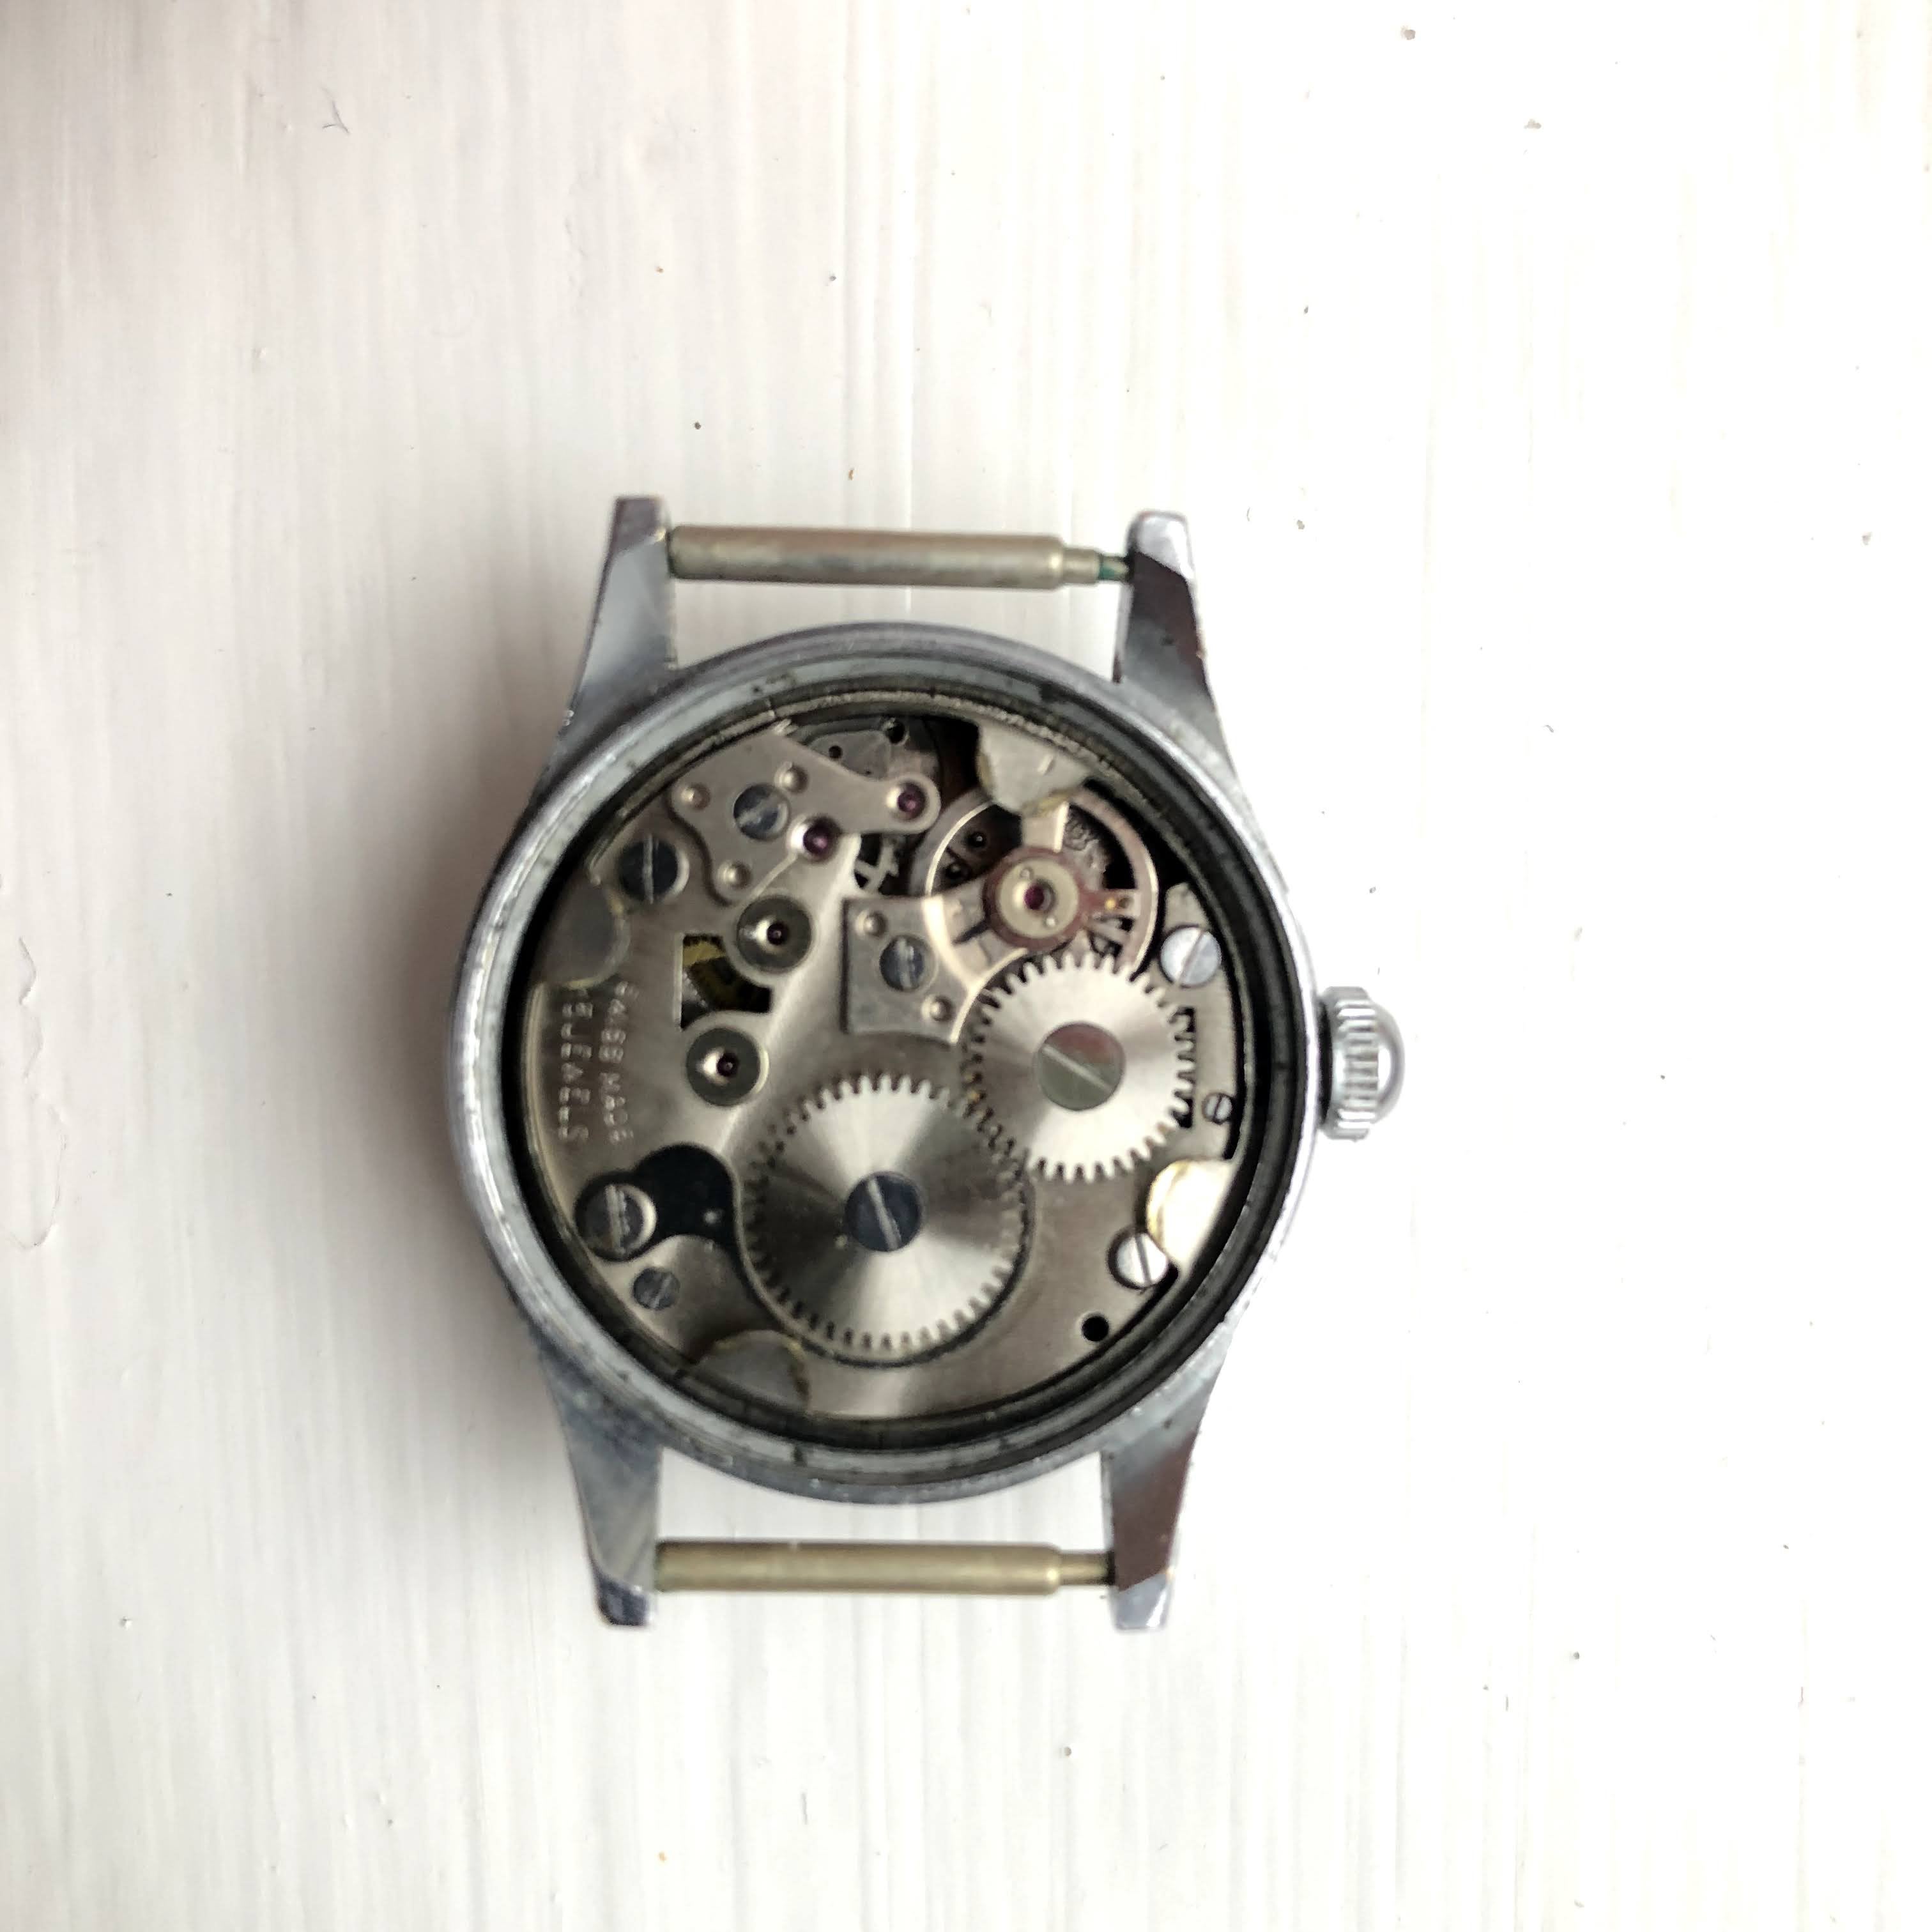 Hour and minute hand stopped moving, second hand moving, hour and minute moving when setting watch. | WatchUSeek Watch Forums